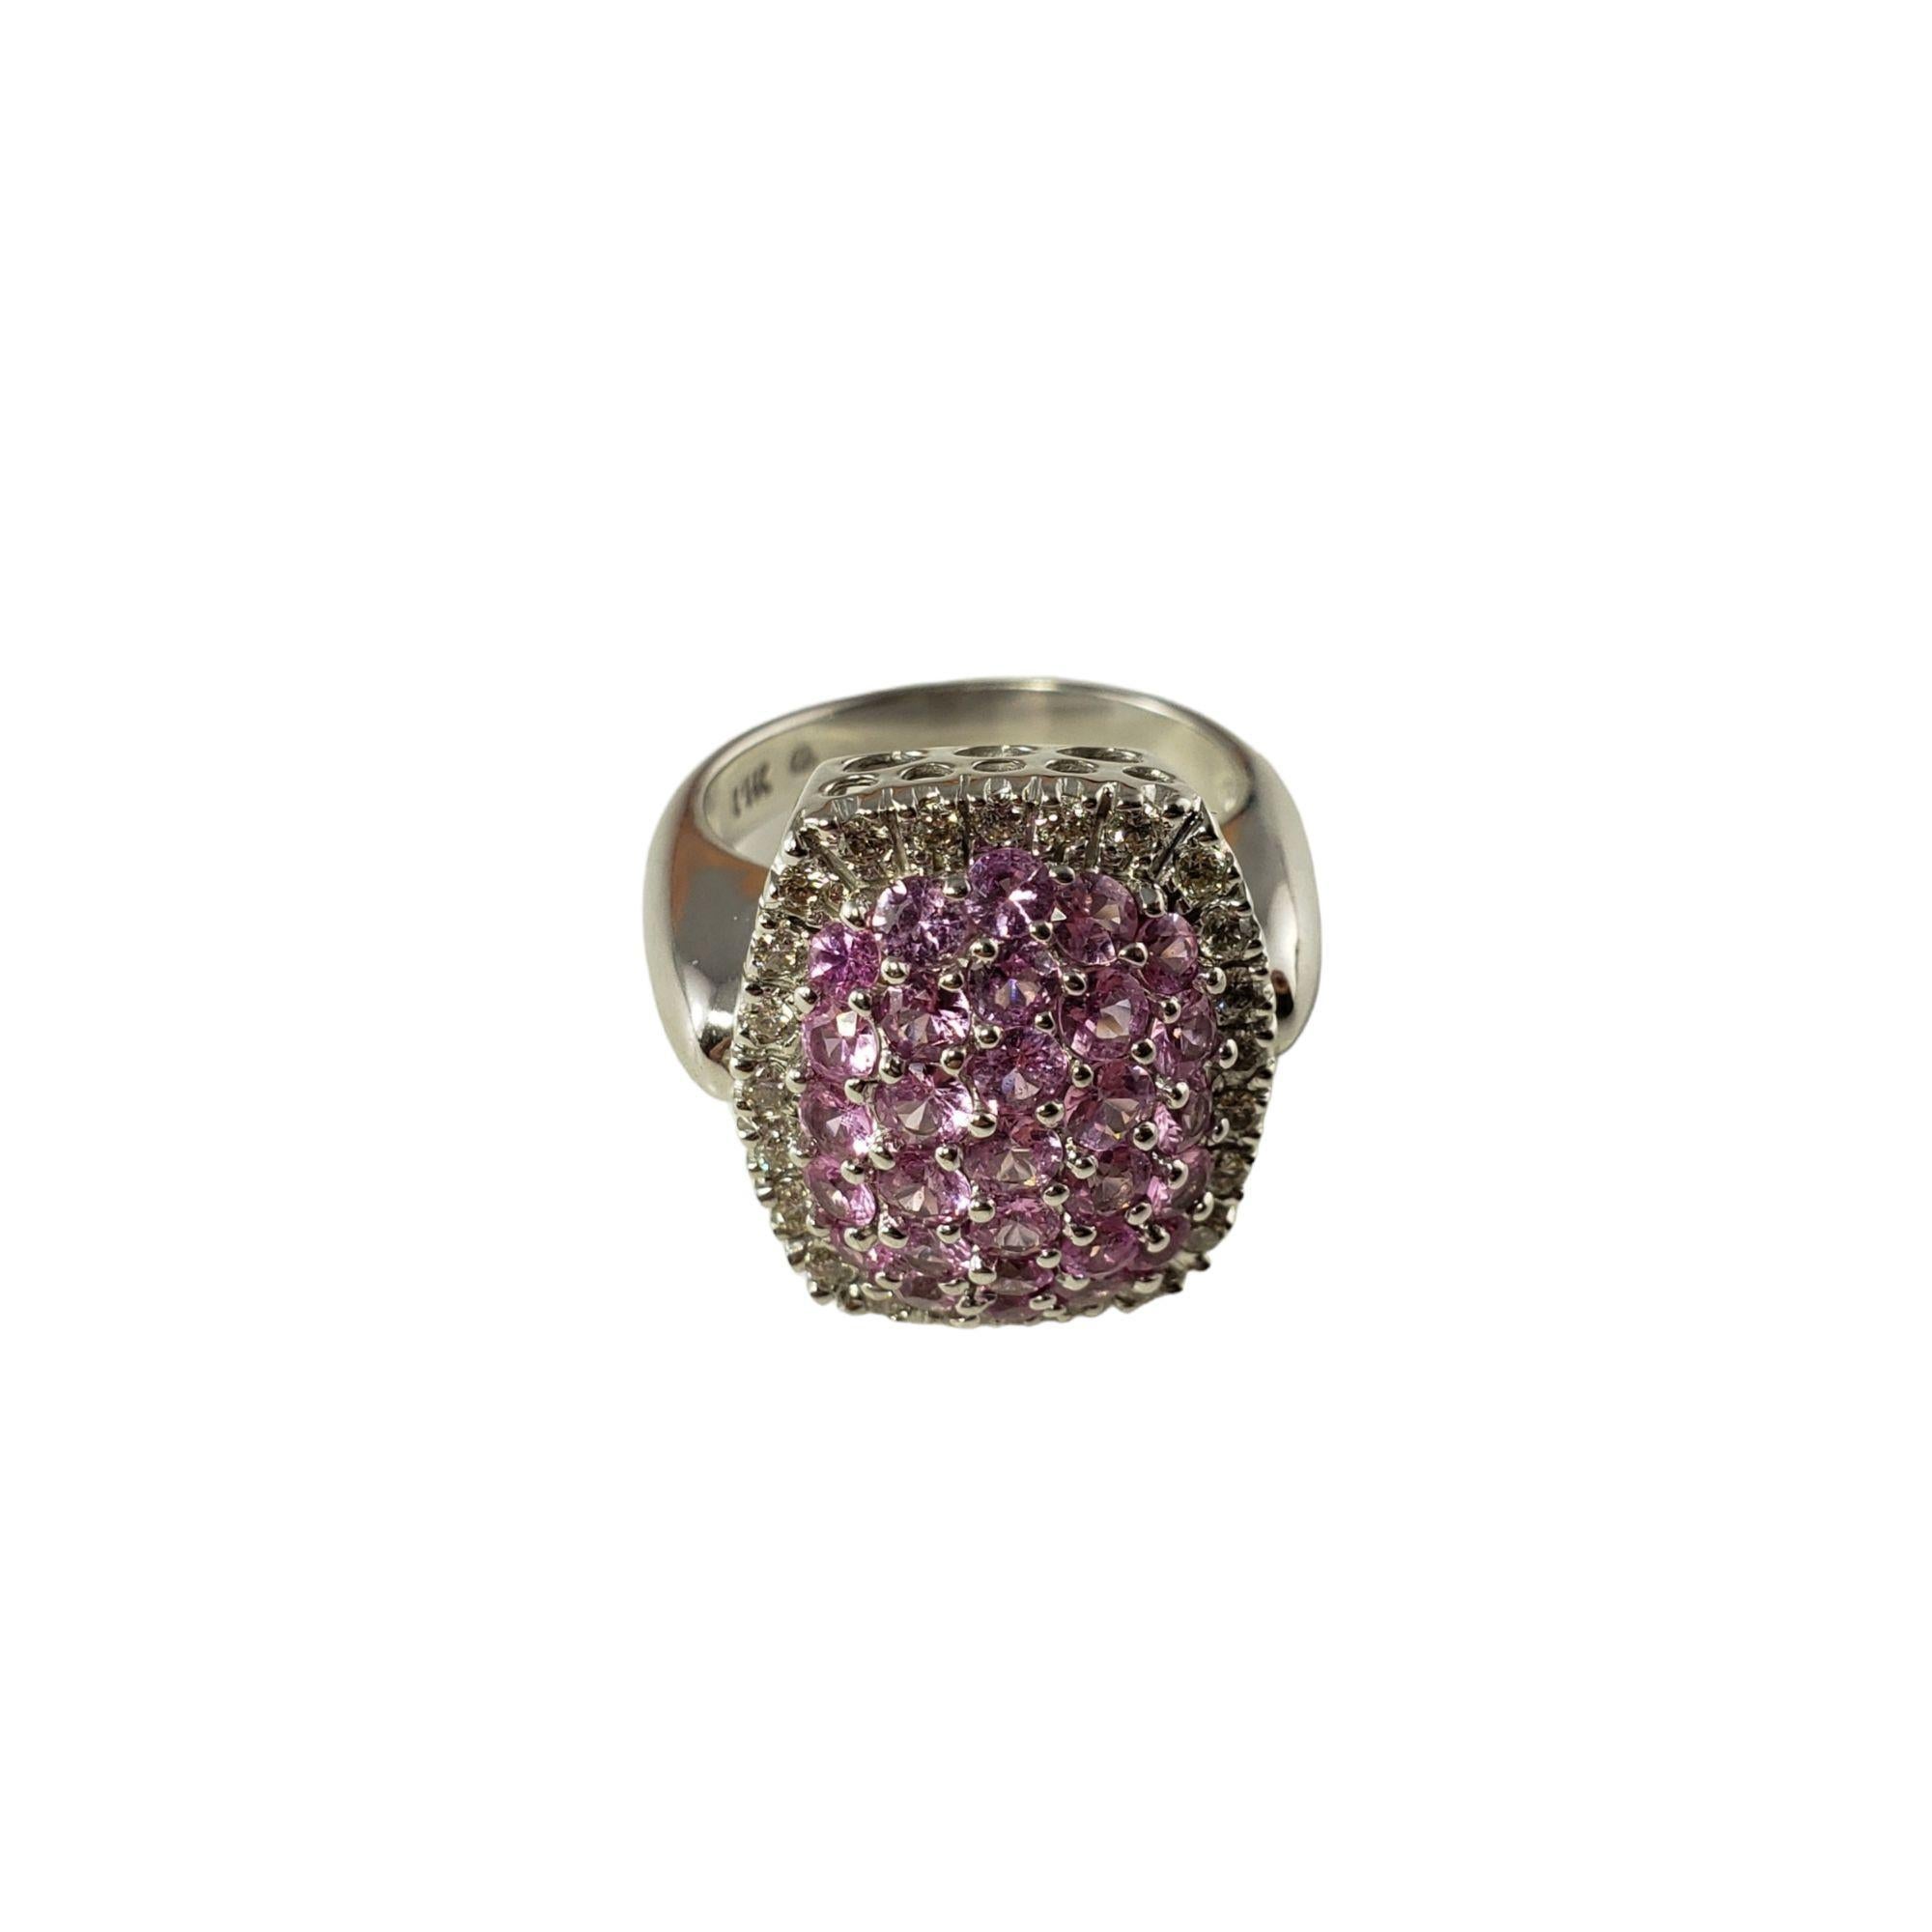 This sparkling ring features 29 pink sapphires and 24 round brilliant cut diamonds set in beautifully detailed 14K white gold.  

Top of ring measures 18 mm x 16 mm.  Shank:  3 mm.

Total sapphire weight:  3.49 ct.

Total diamond weight: .44